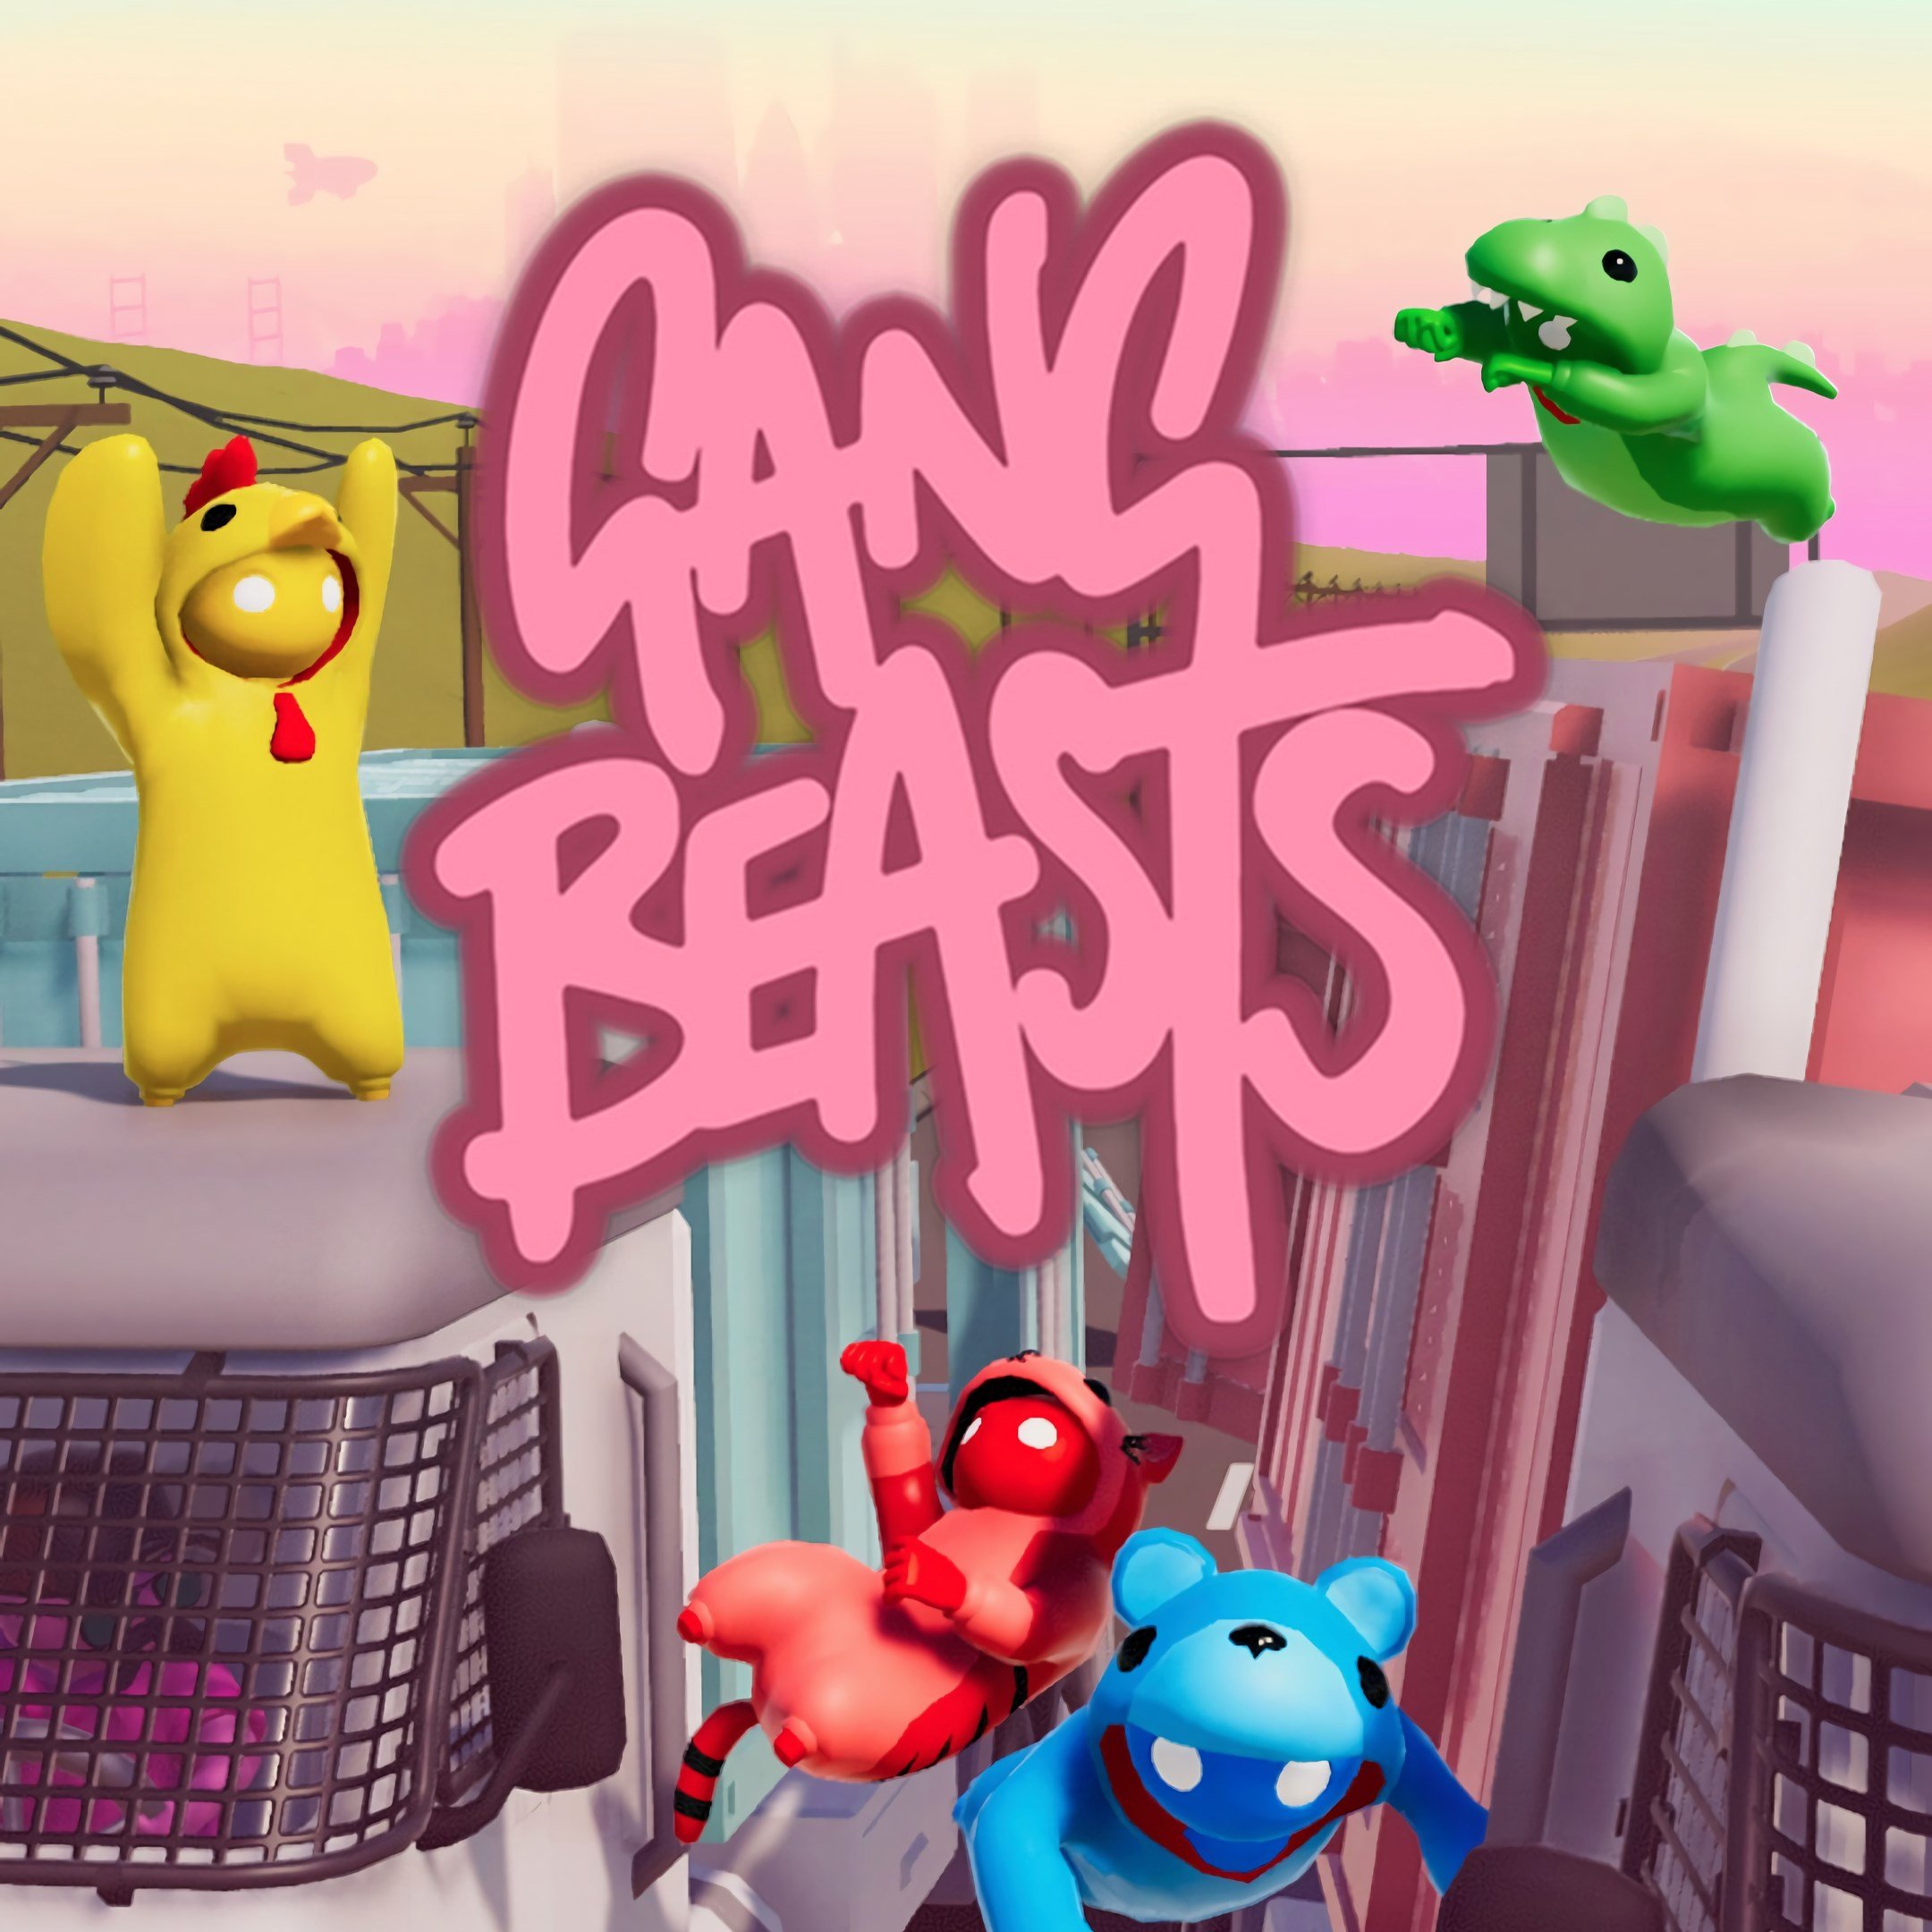 Boxart for Gang Beasts